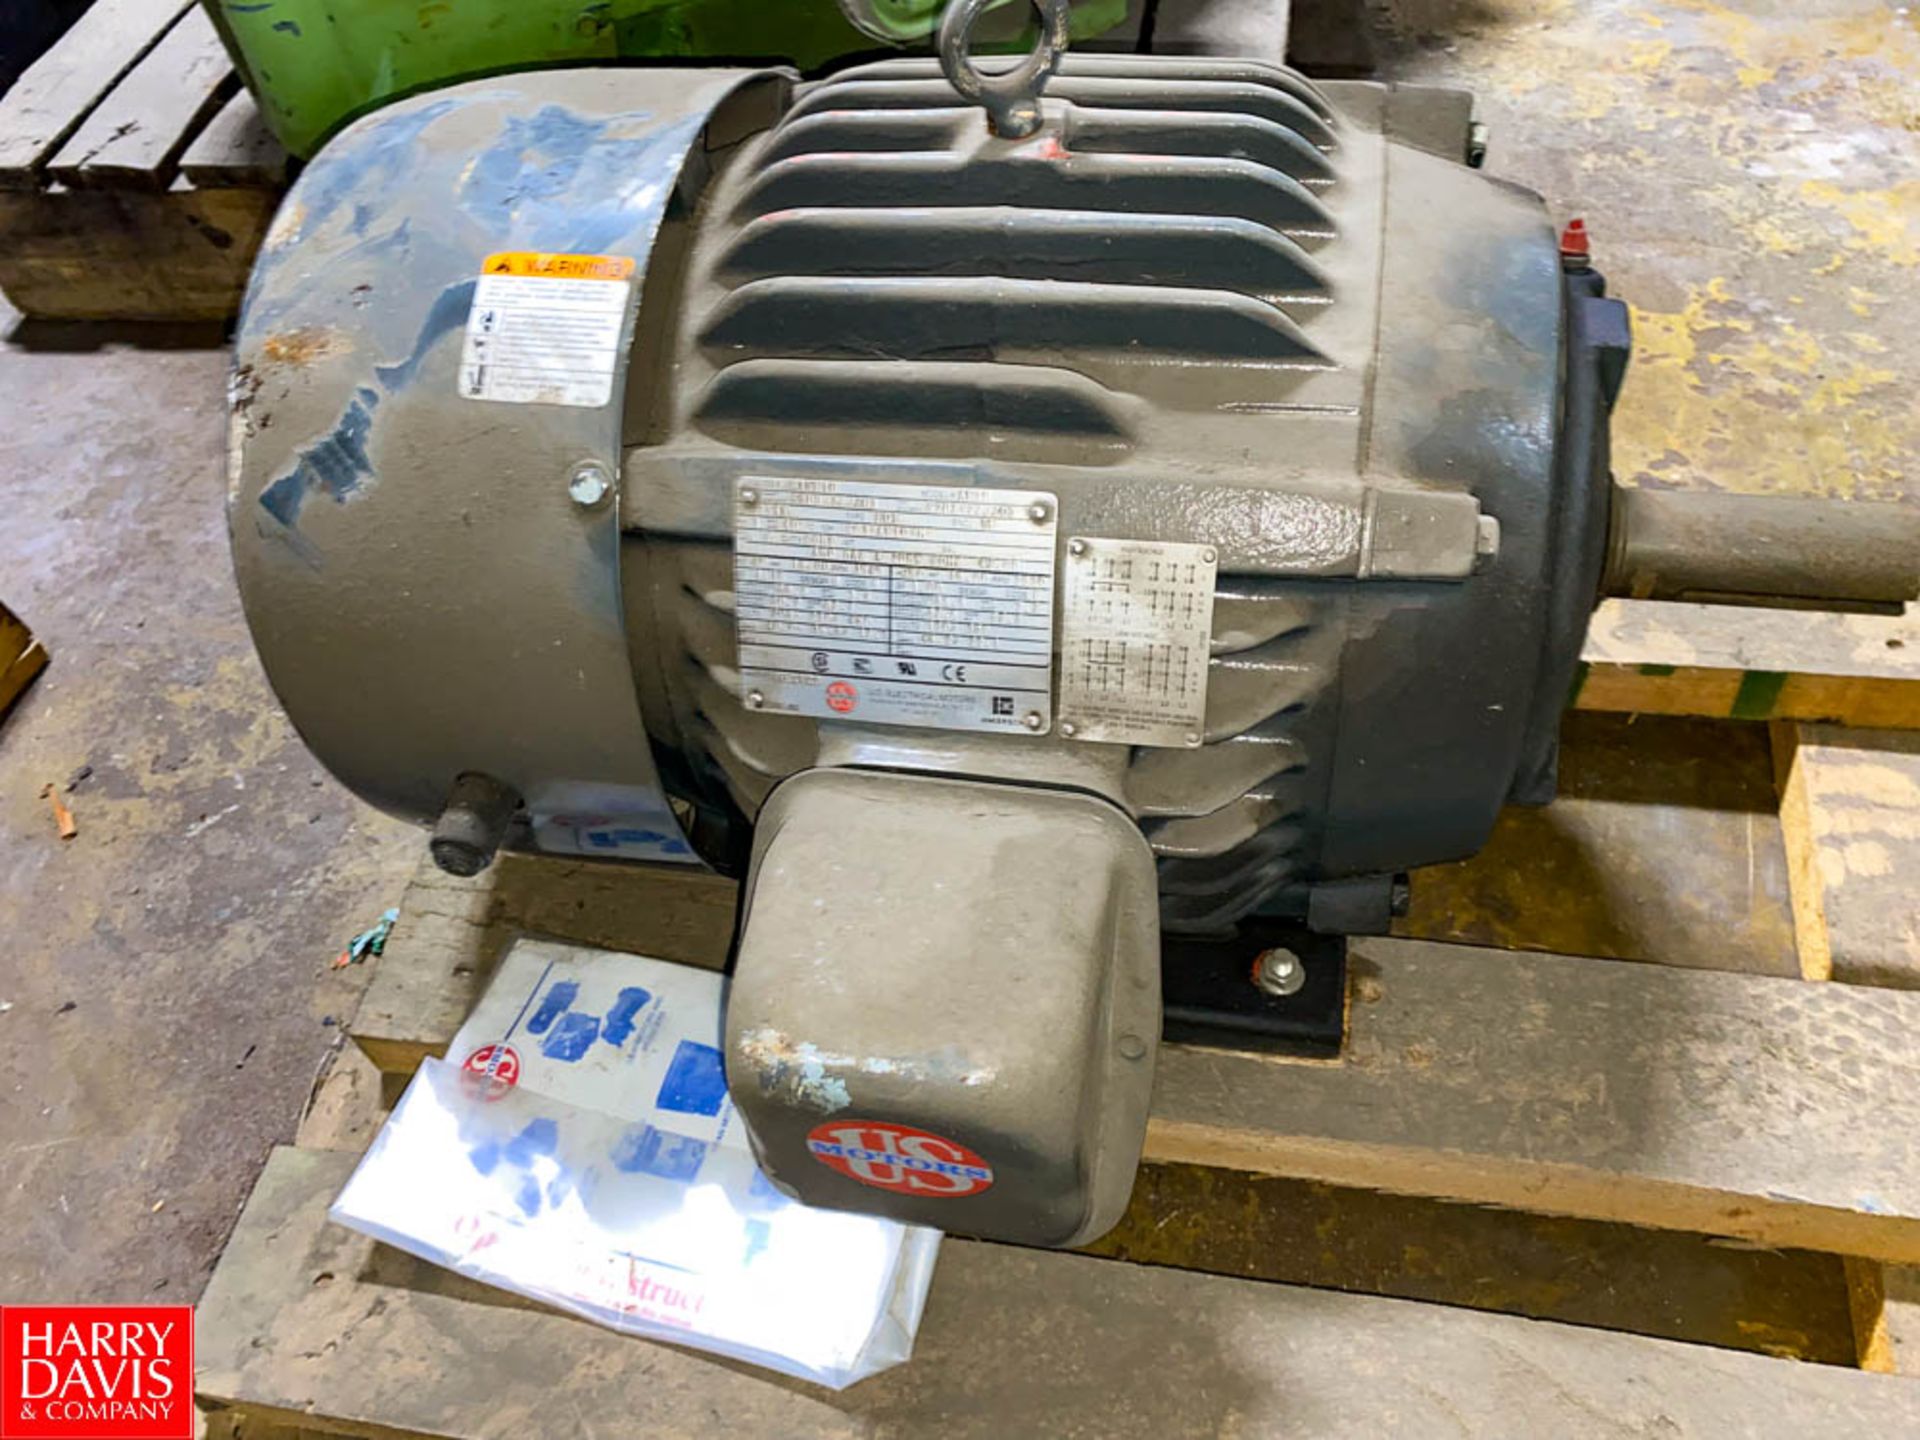 US Electronic 15 HP 2,920 RPM Motor - Rigging Fee $50